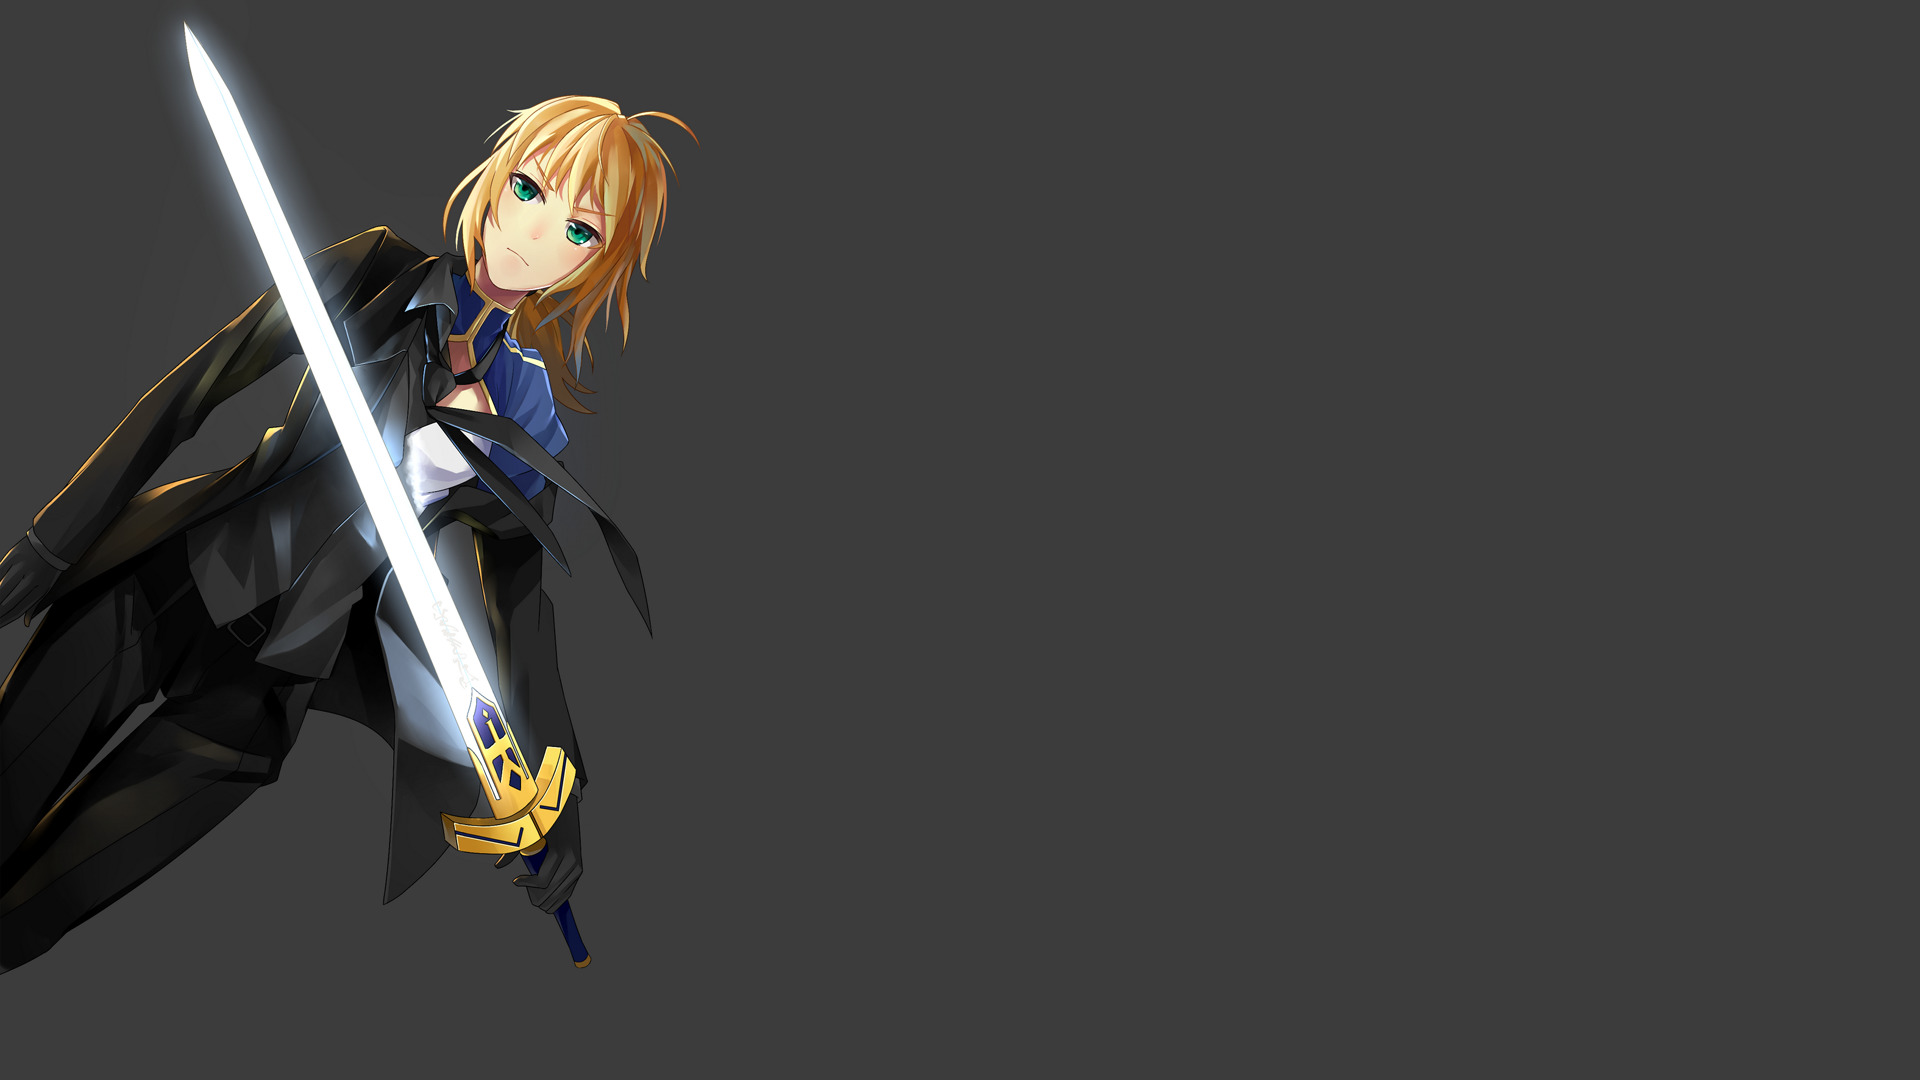 anime, Anime Girls, Saber, Fate Series, Suits, Blonde, Sword, Weapon Wallpaper